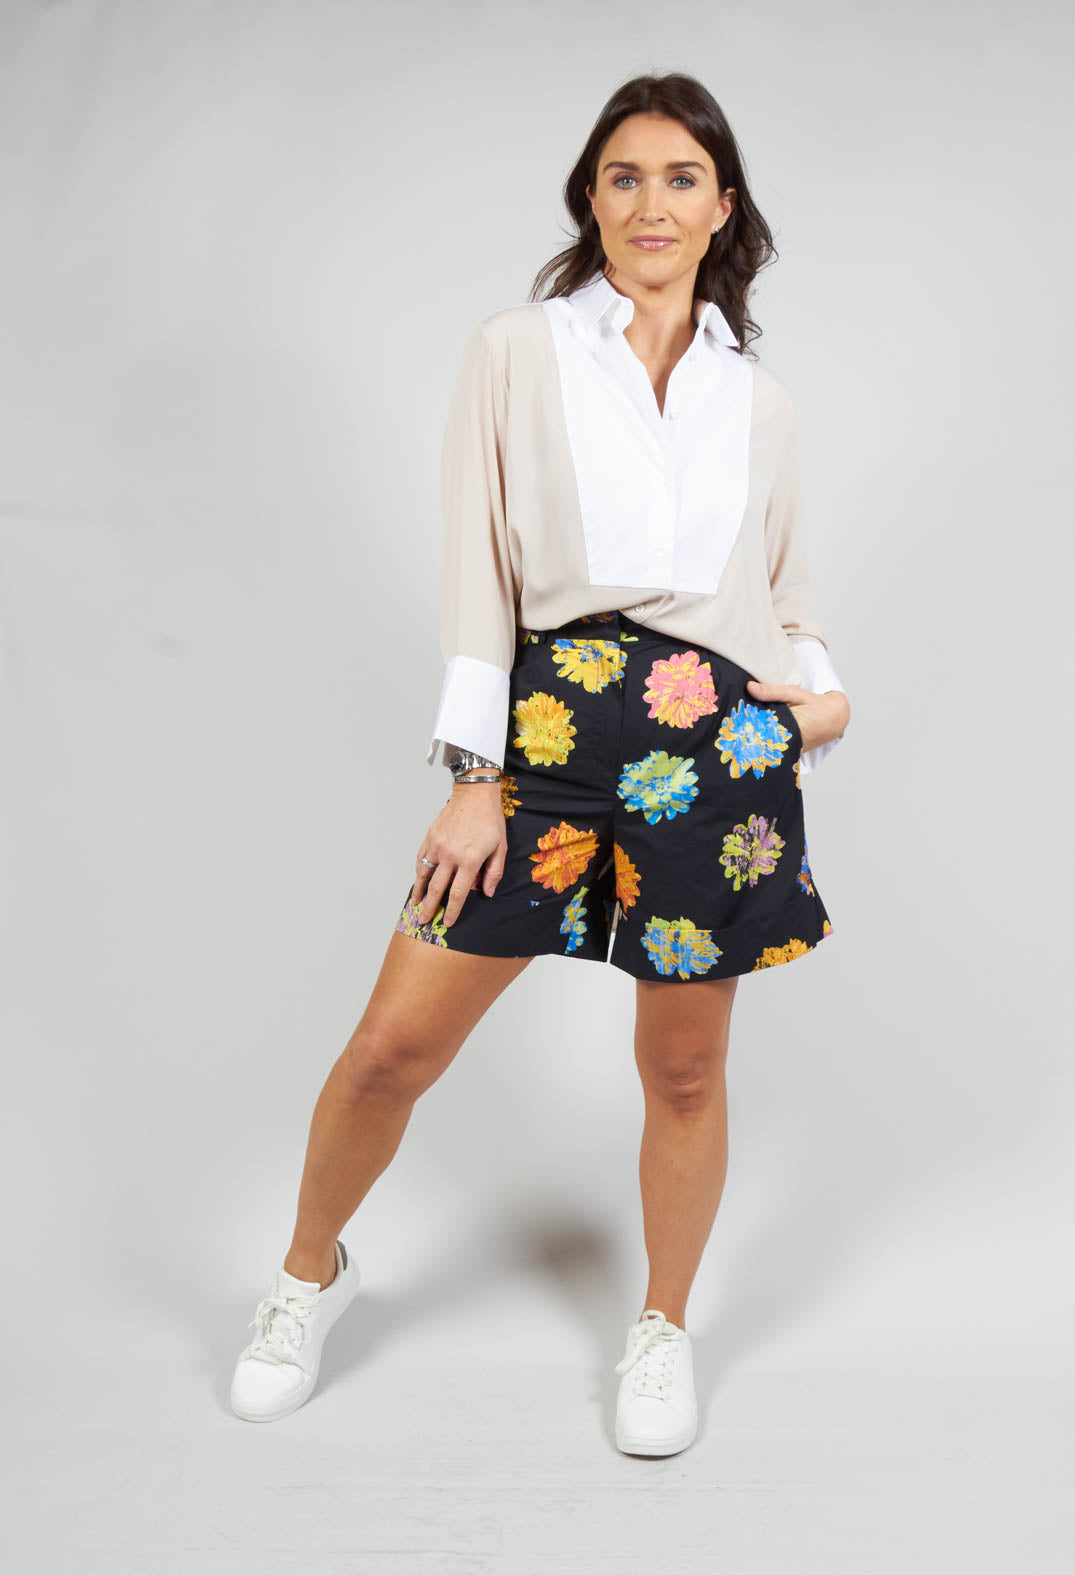 lady wearing high waited floral shorts with front pockets